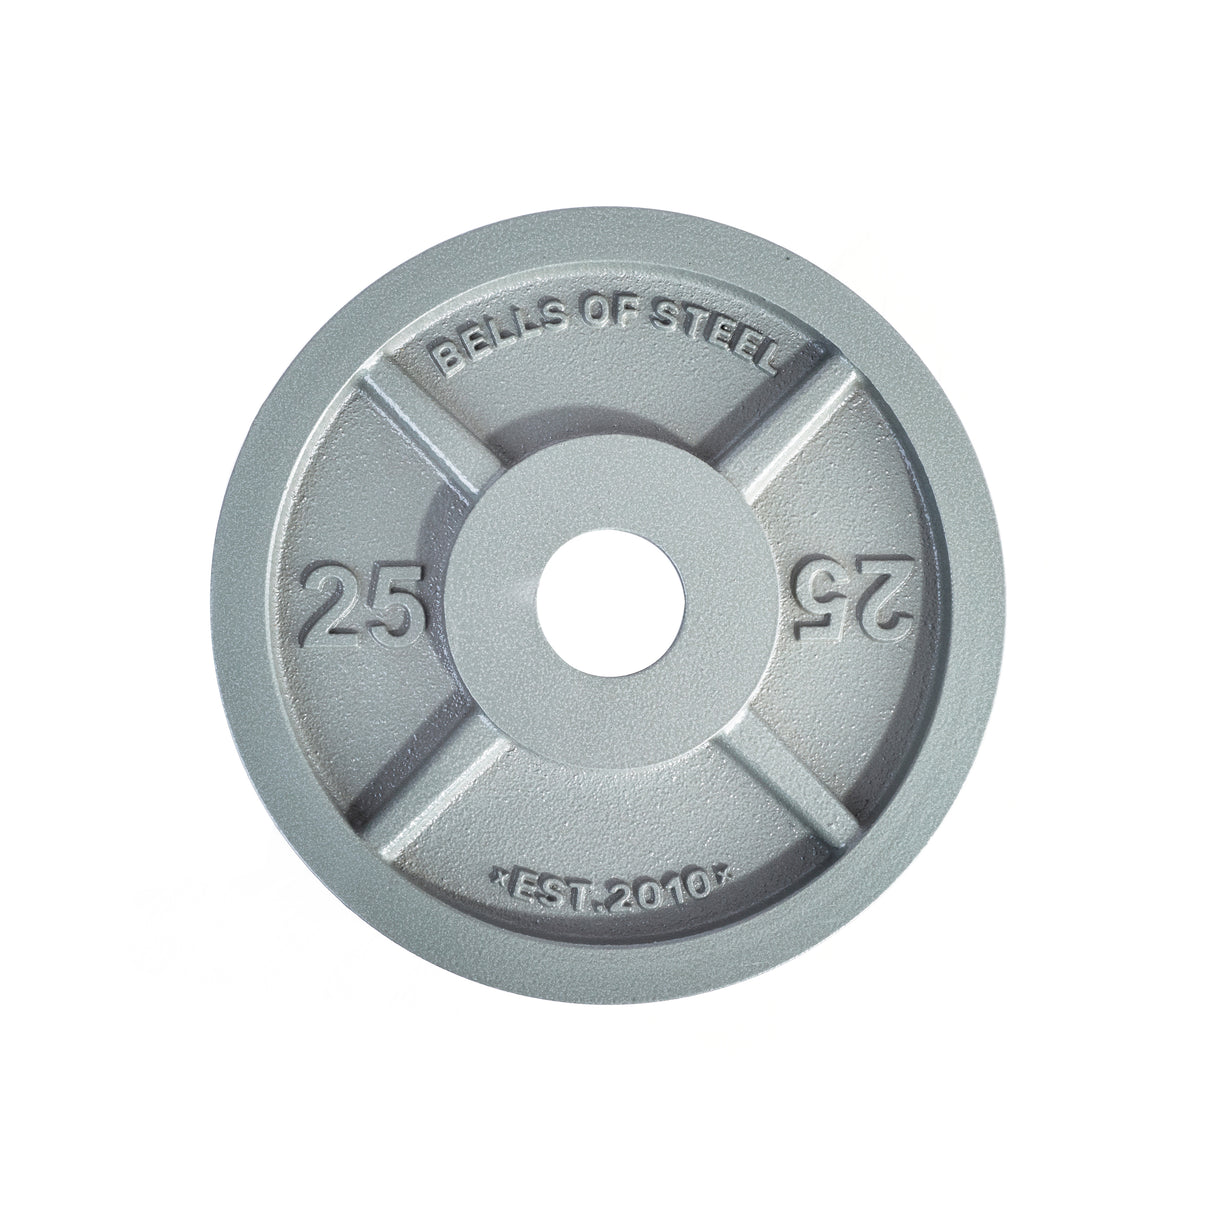 Machined Iron Olympic Weight Plates - 25 LB (Pair)